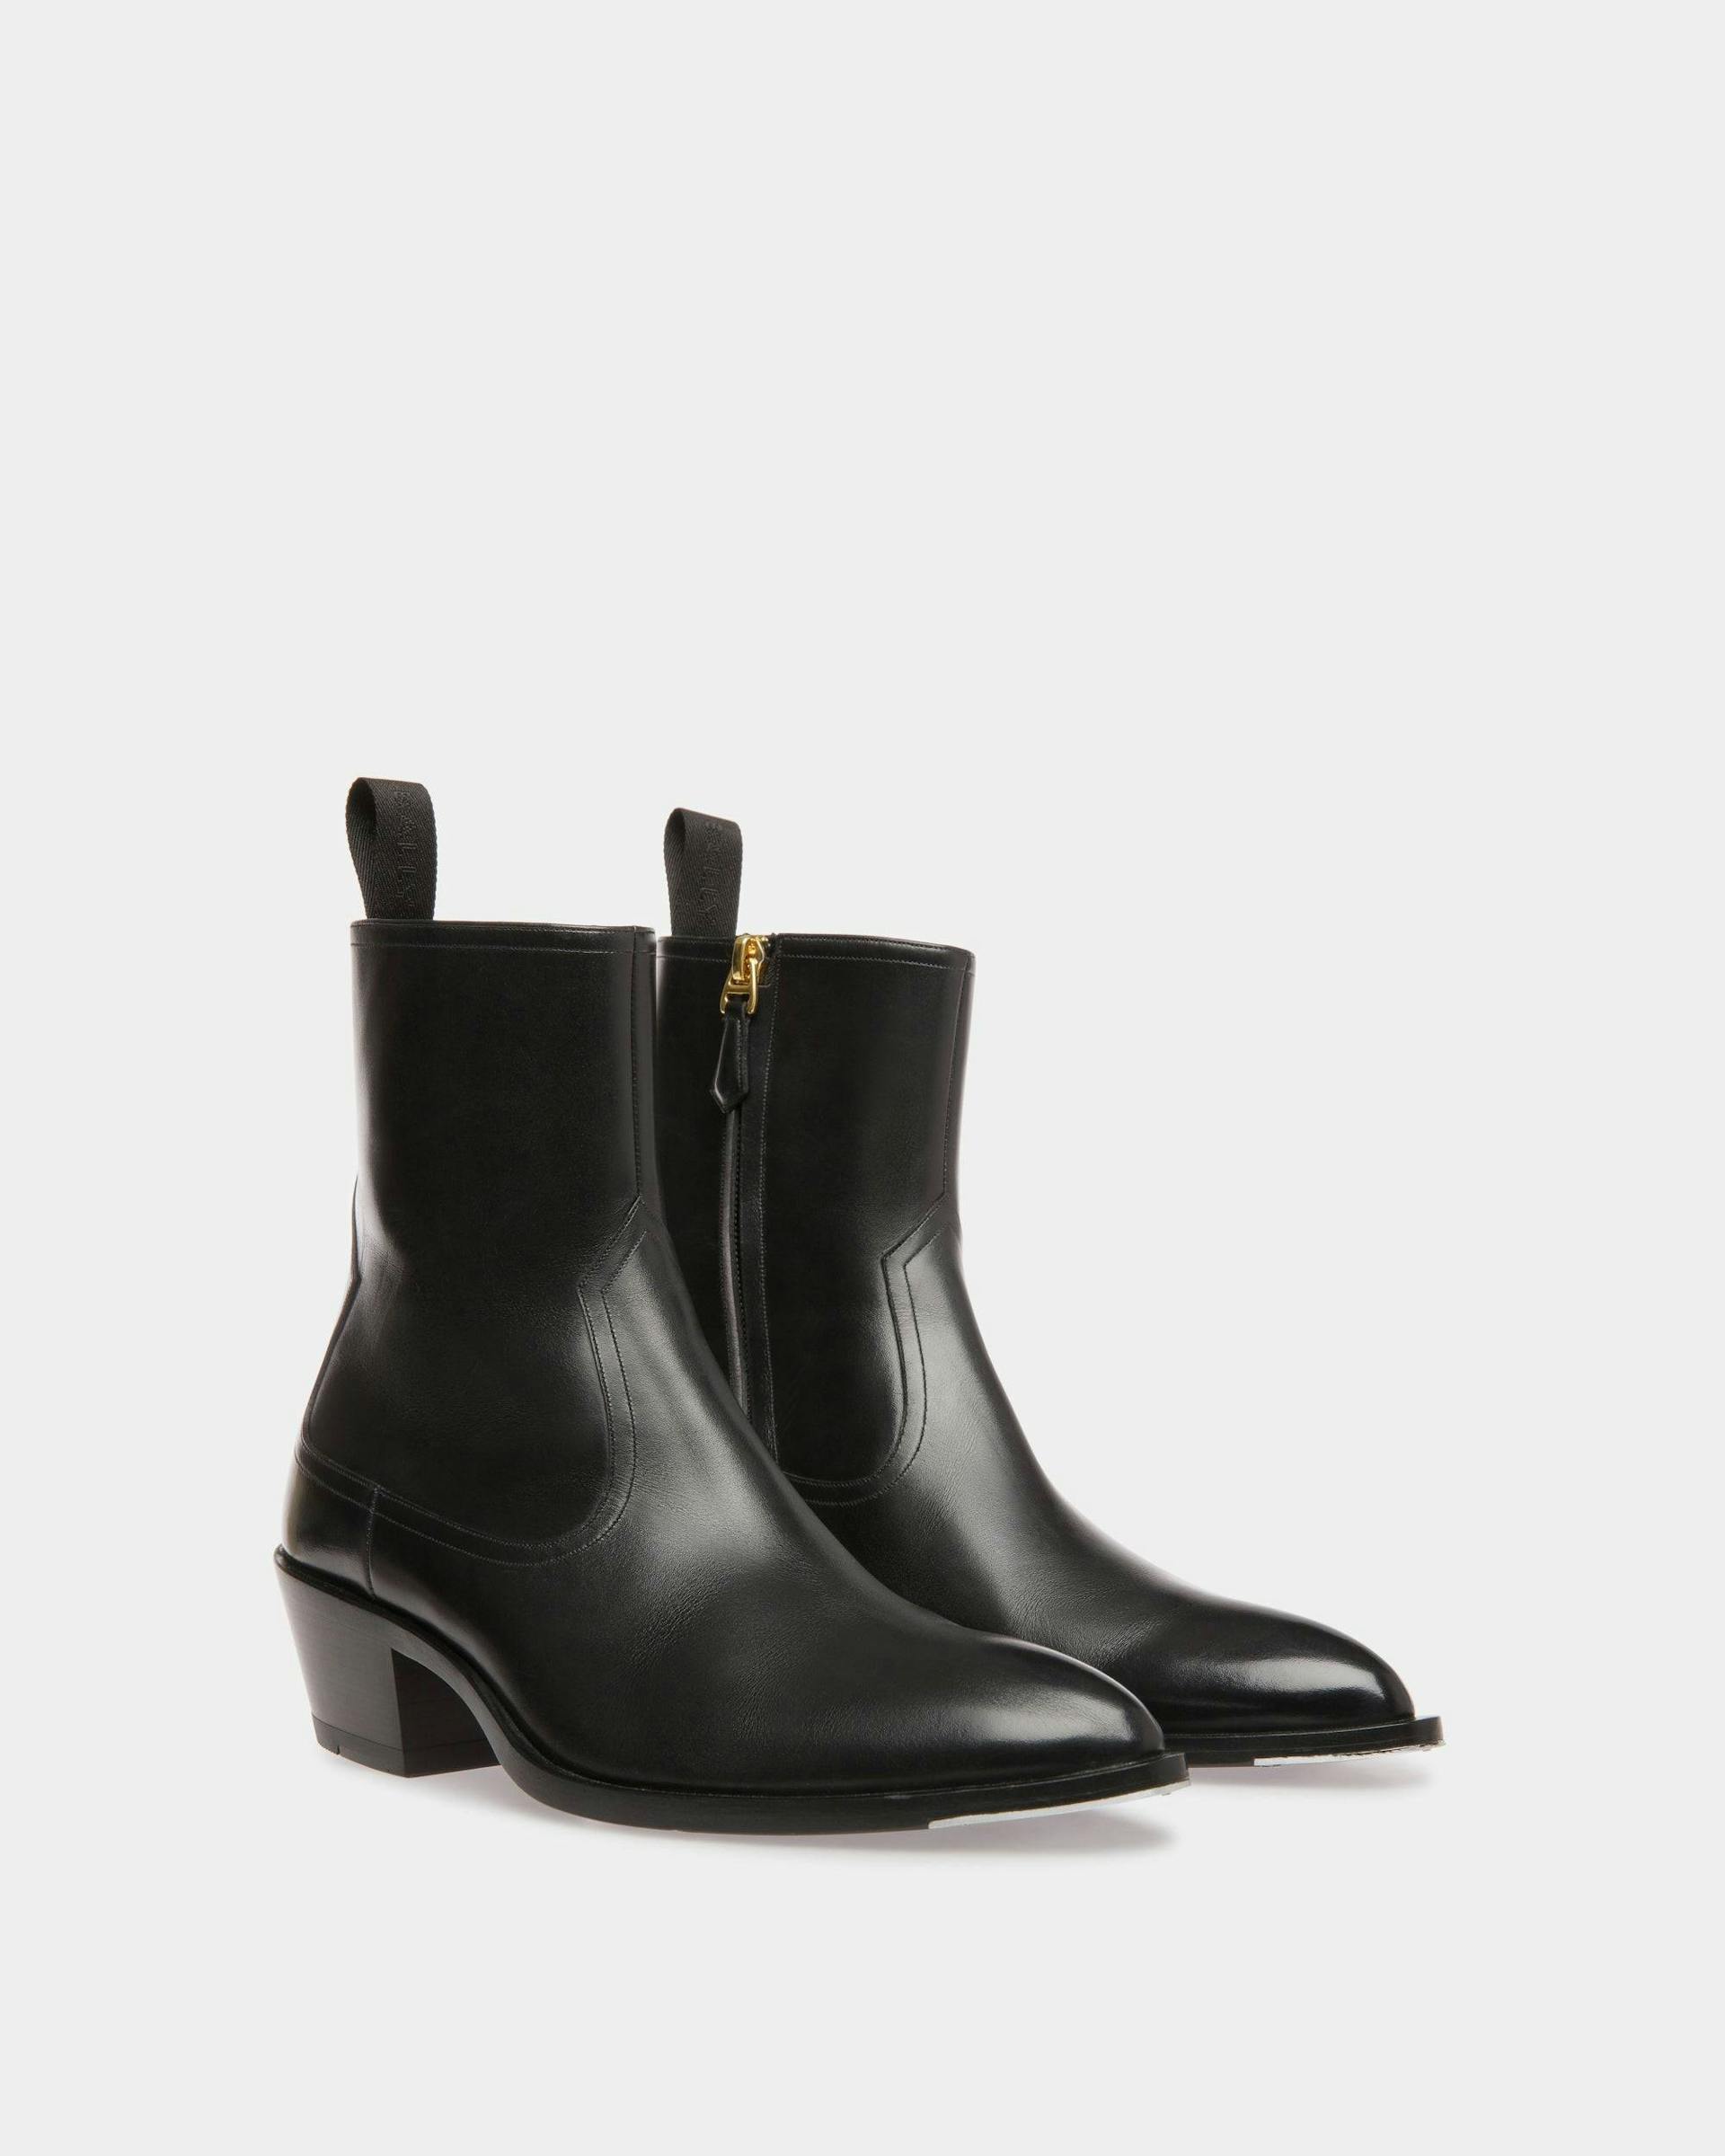 Vegas Boots In Black Leather - Women's - Bally - 03